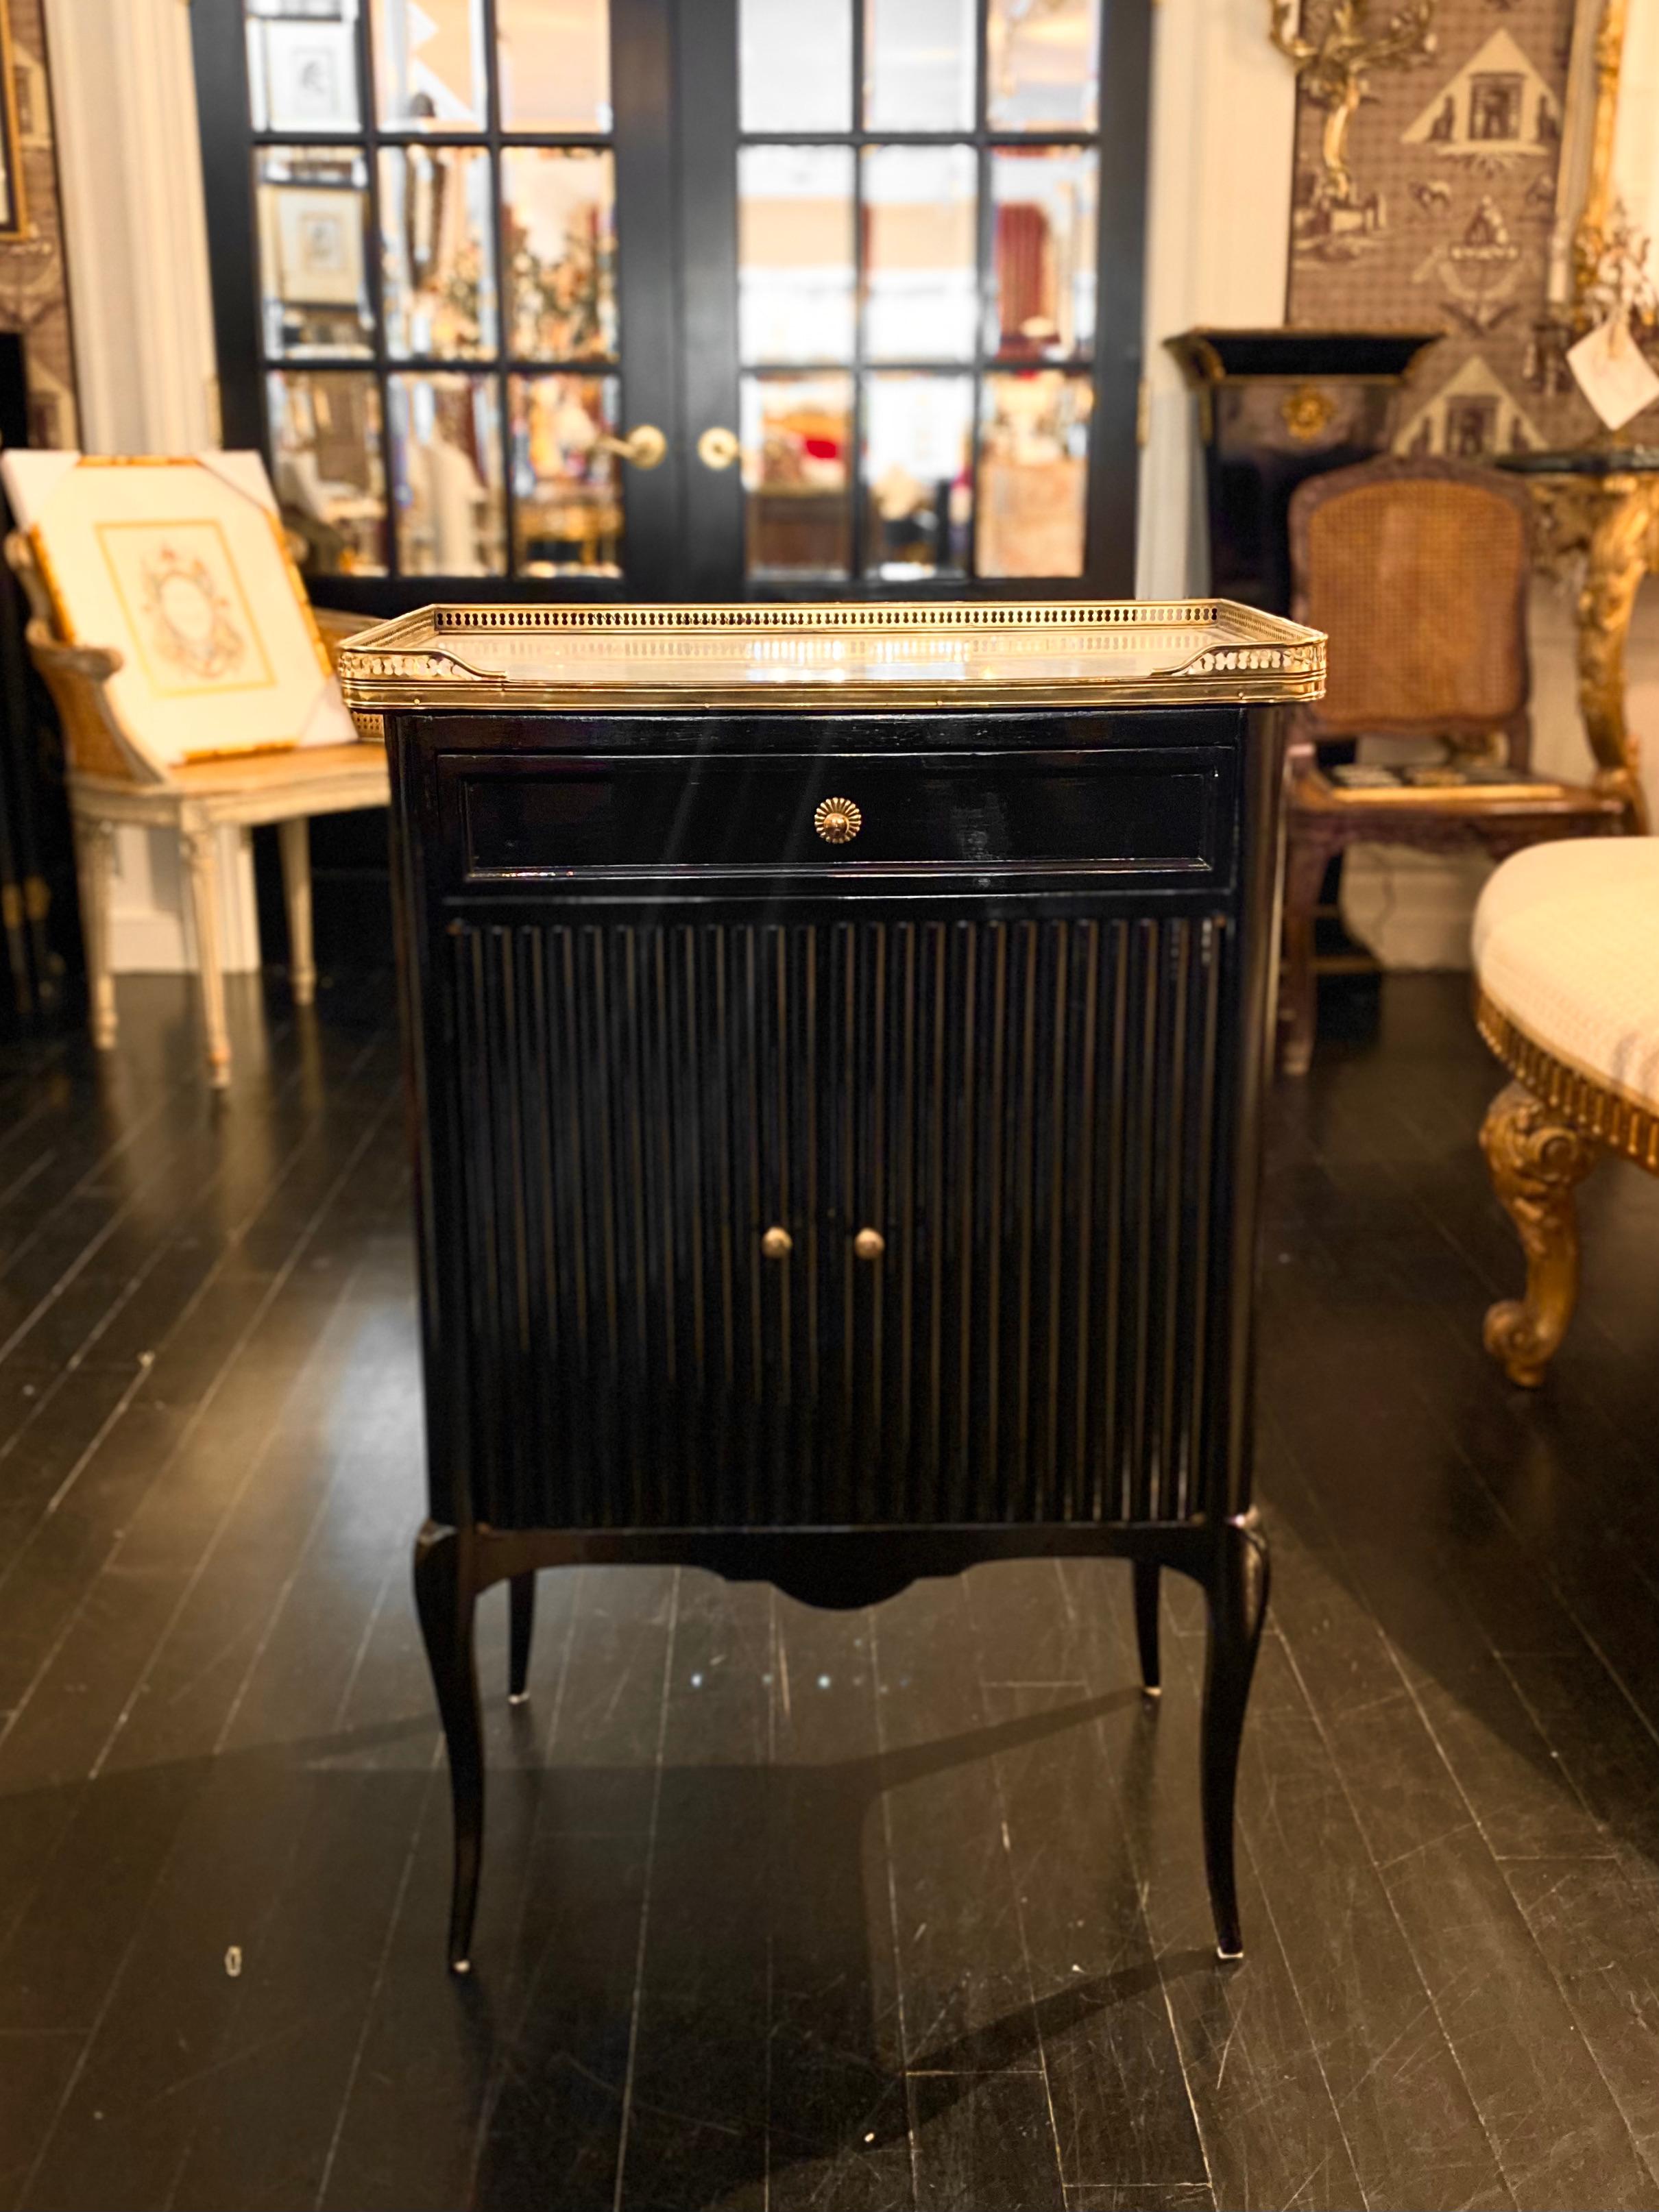 French Maison Jansen style, black-lacquered cabinet, Louis XVI style, marble top.

Versatile cabinet or small salon furniture with white Carrara marble top and bronze gallery. 

The cabinet has been lacquered in high-gloss black, enhancing it's